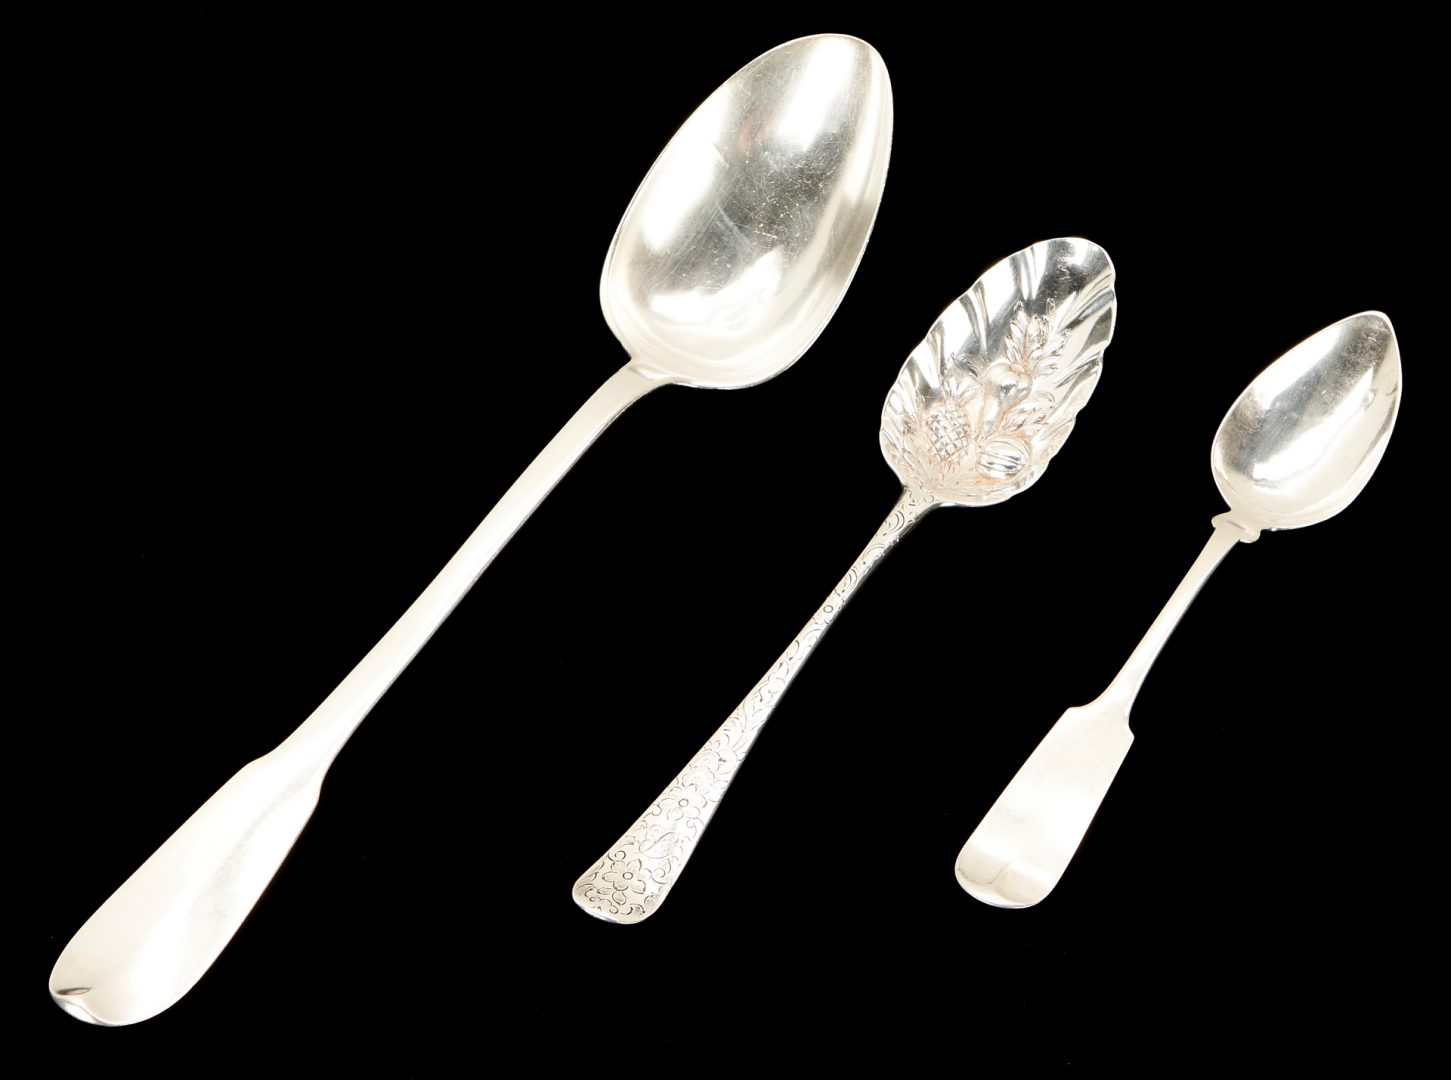 Lot 56: 17 Pcs. English Sterling Silver, incl. Sugar, Creamer and Stuffing Spoon